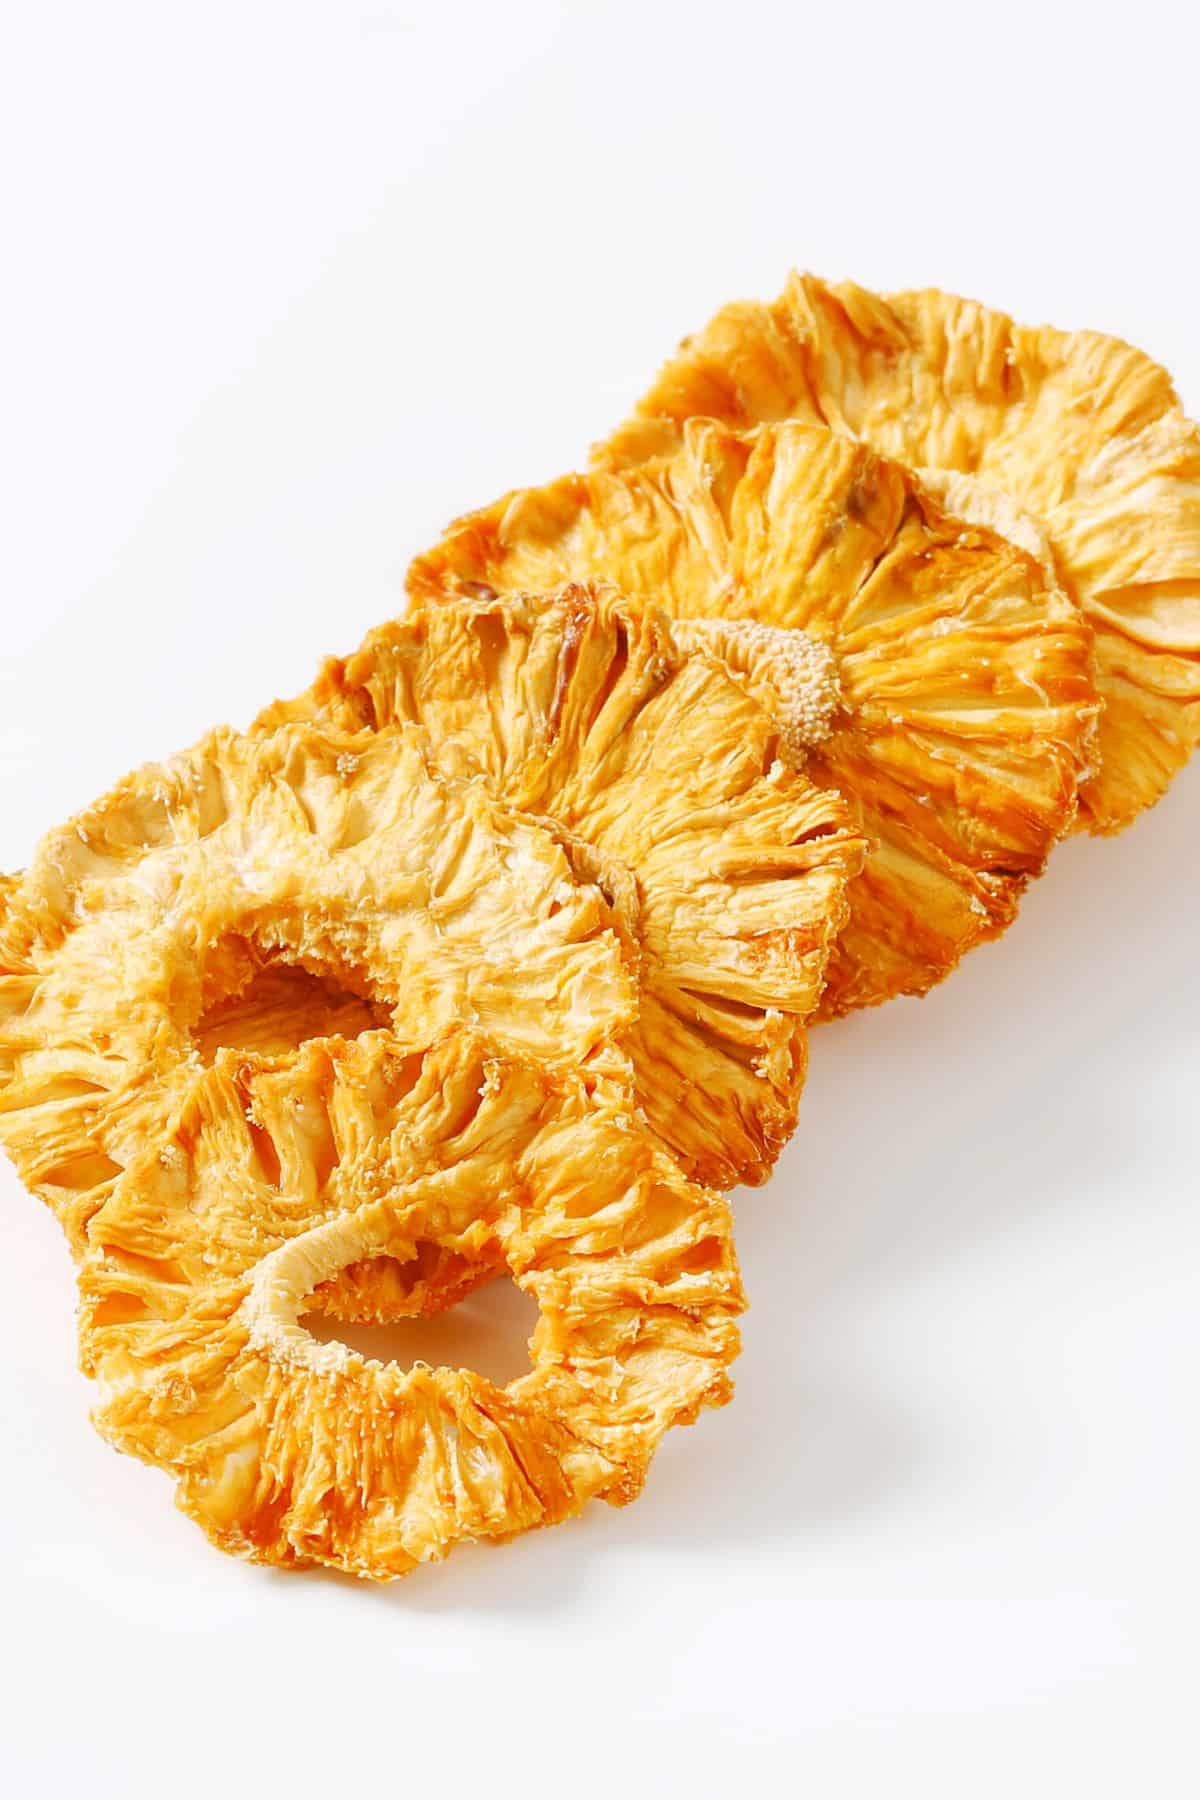 A row of dehydrated pineapple rings on a white surface.